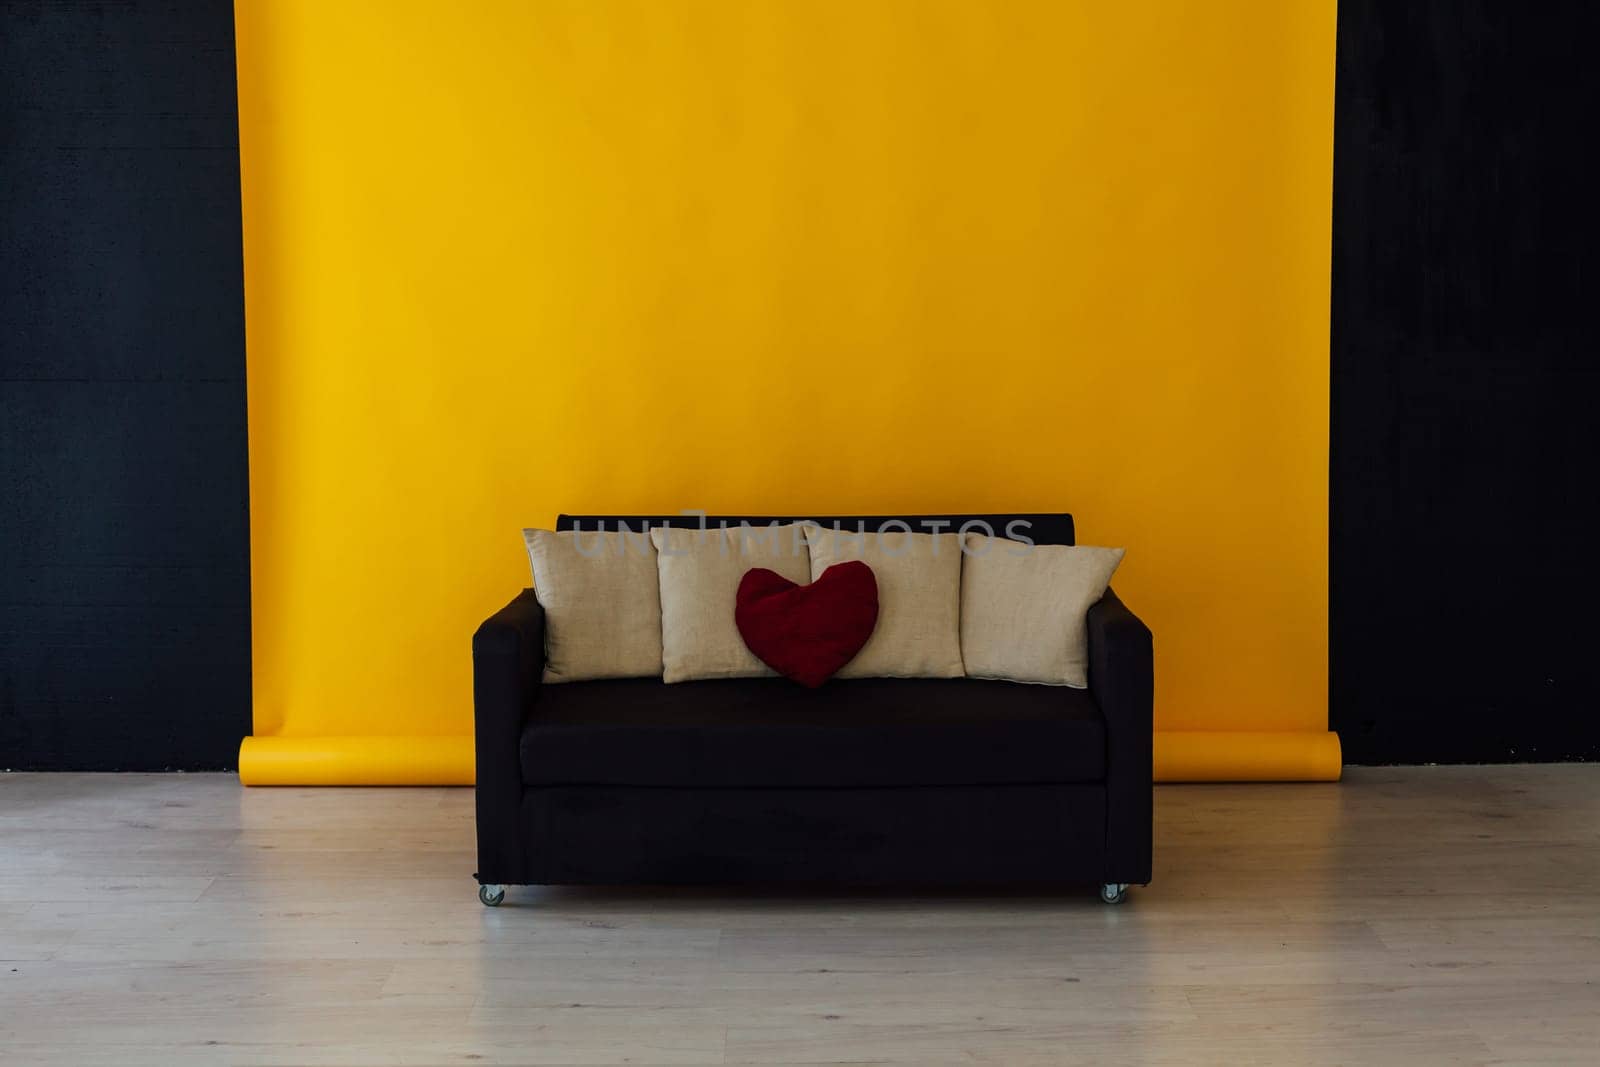 black sofa in the interior of the yellow room